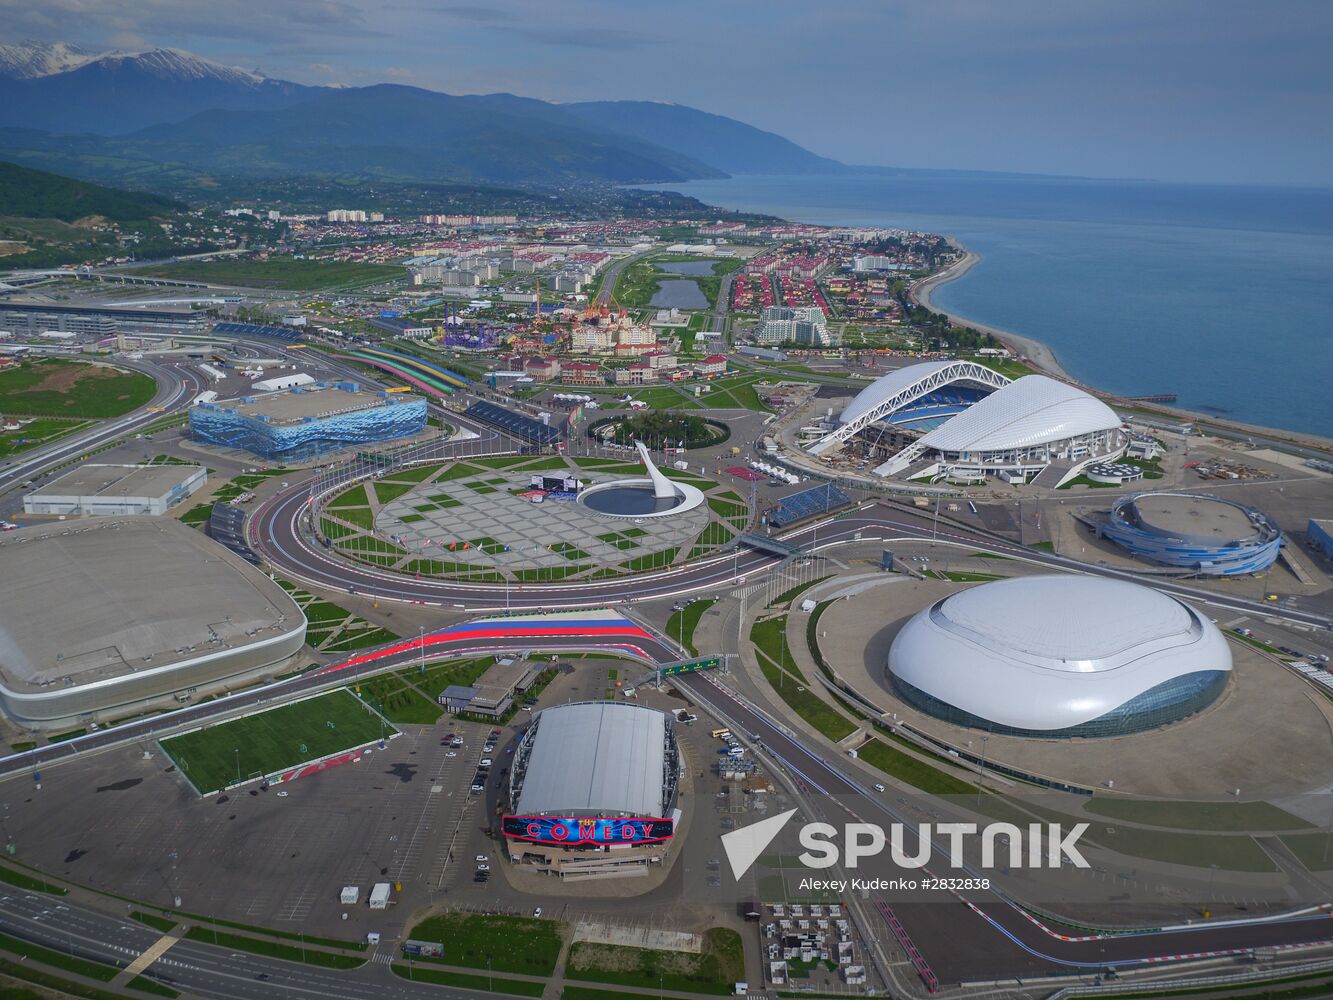 The Sochi Autodrom and Olympic Park